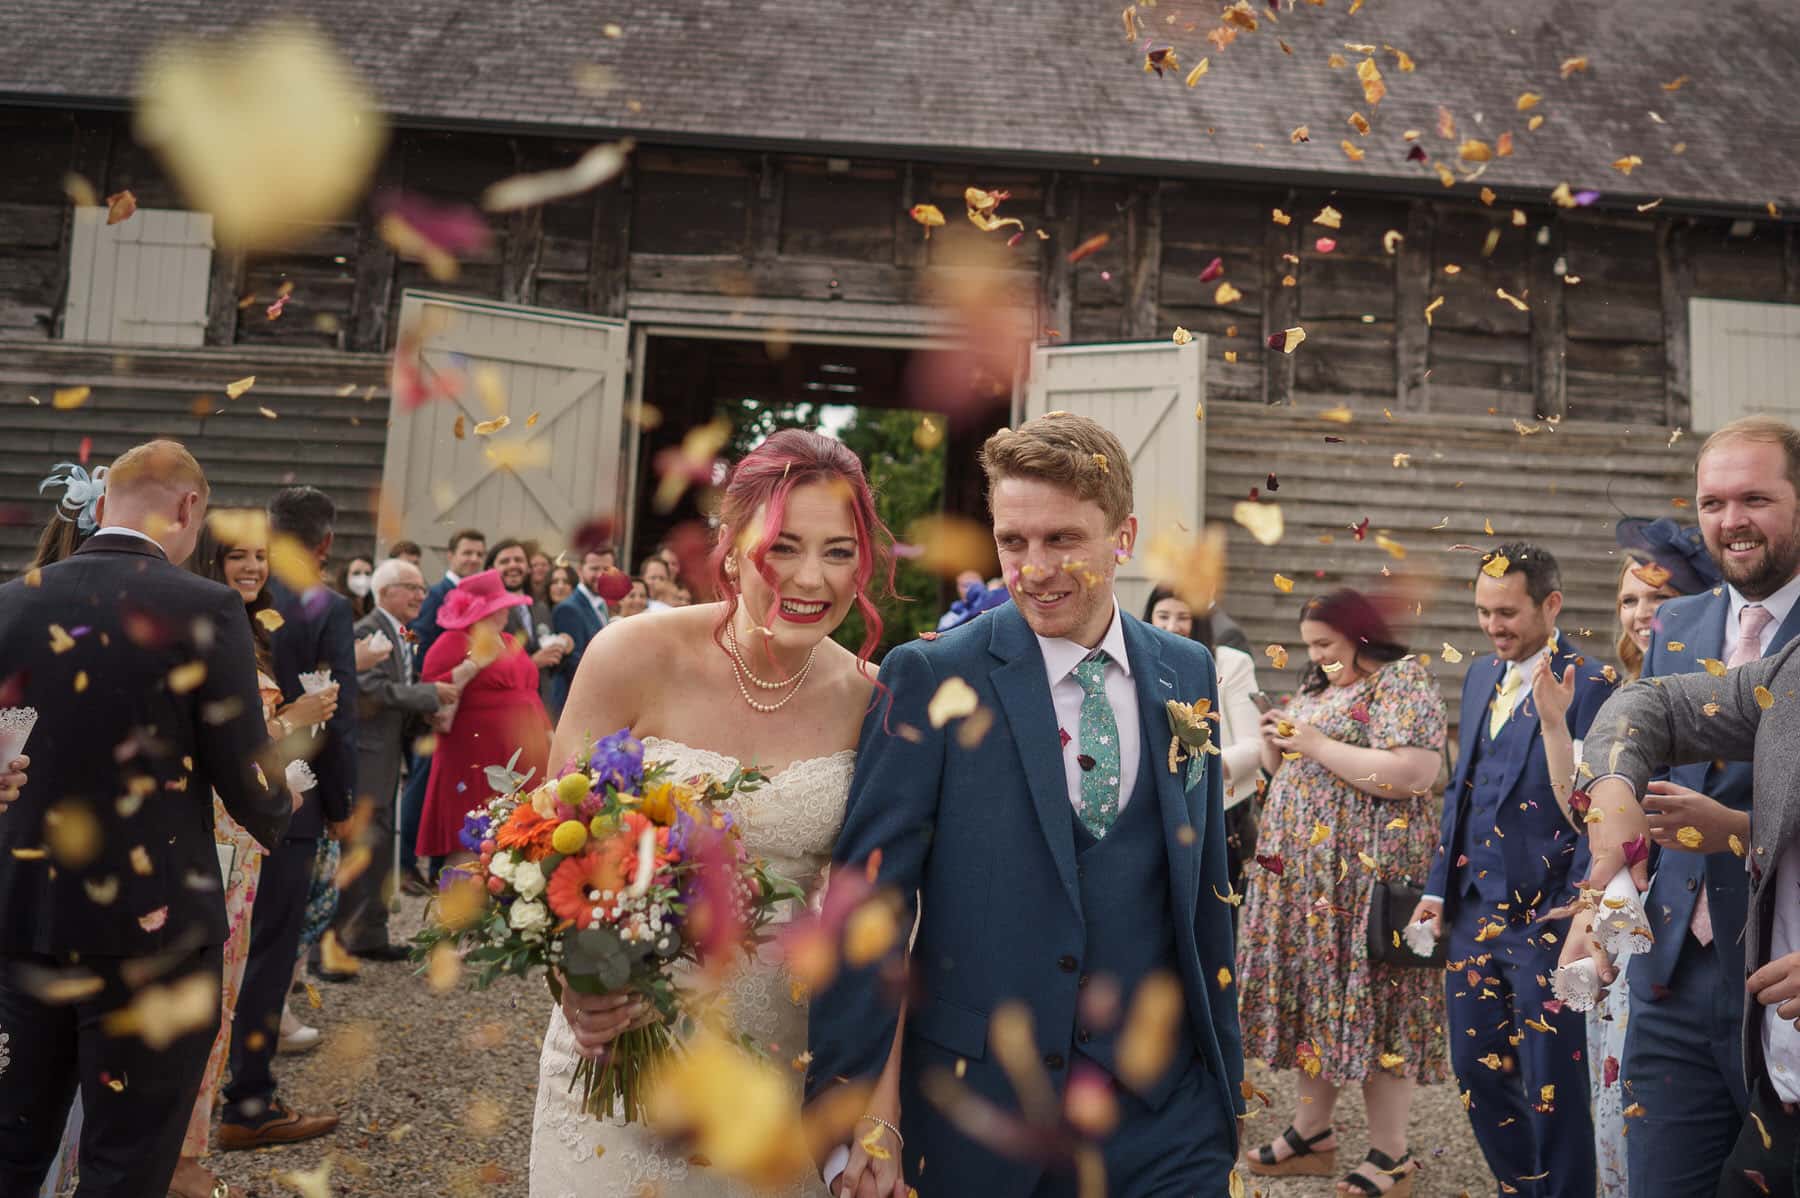 A bride and groom walk out of Pimhill Barn in Shropshire with confetti thrown at them.